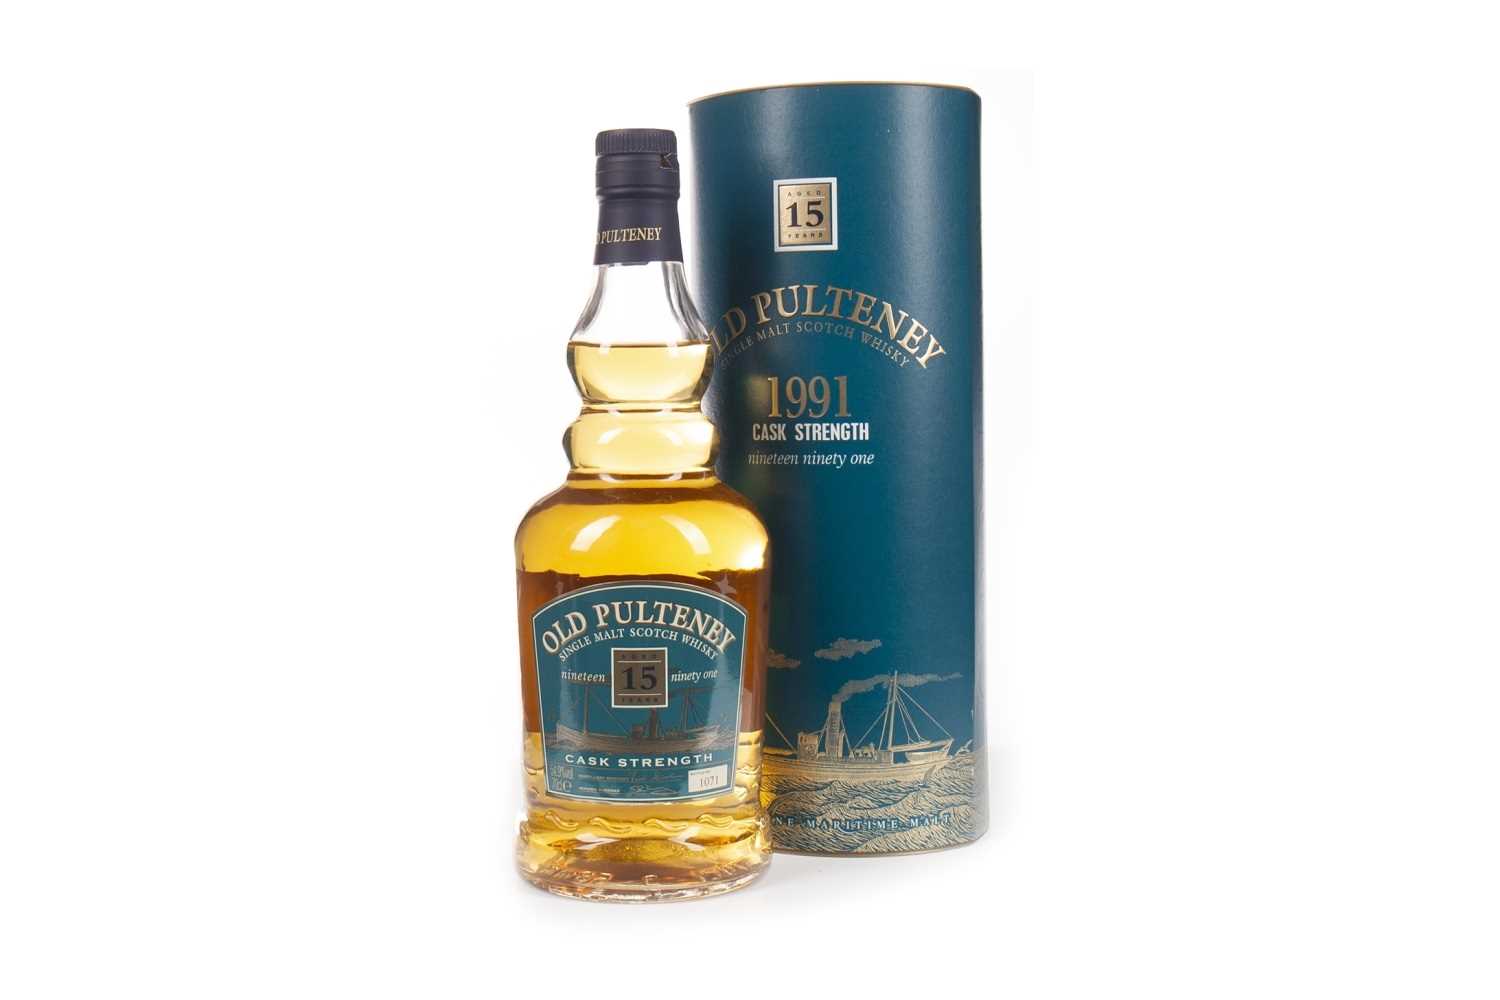 Lot 341 - OLD PULTENEY 1991 AGED 15 YEARS